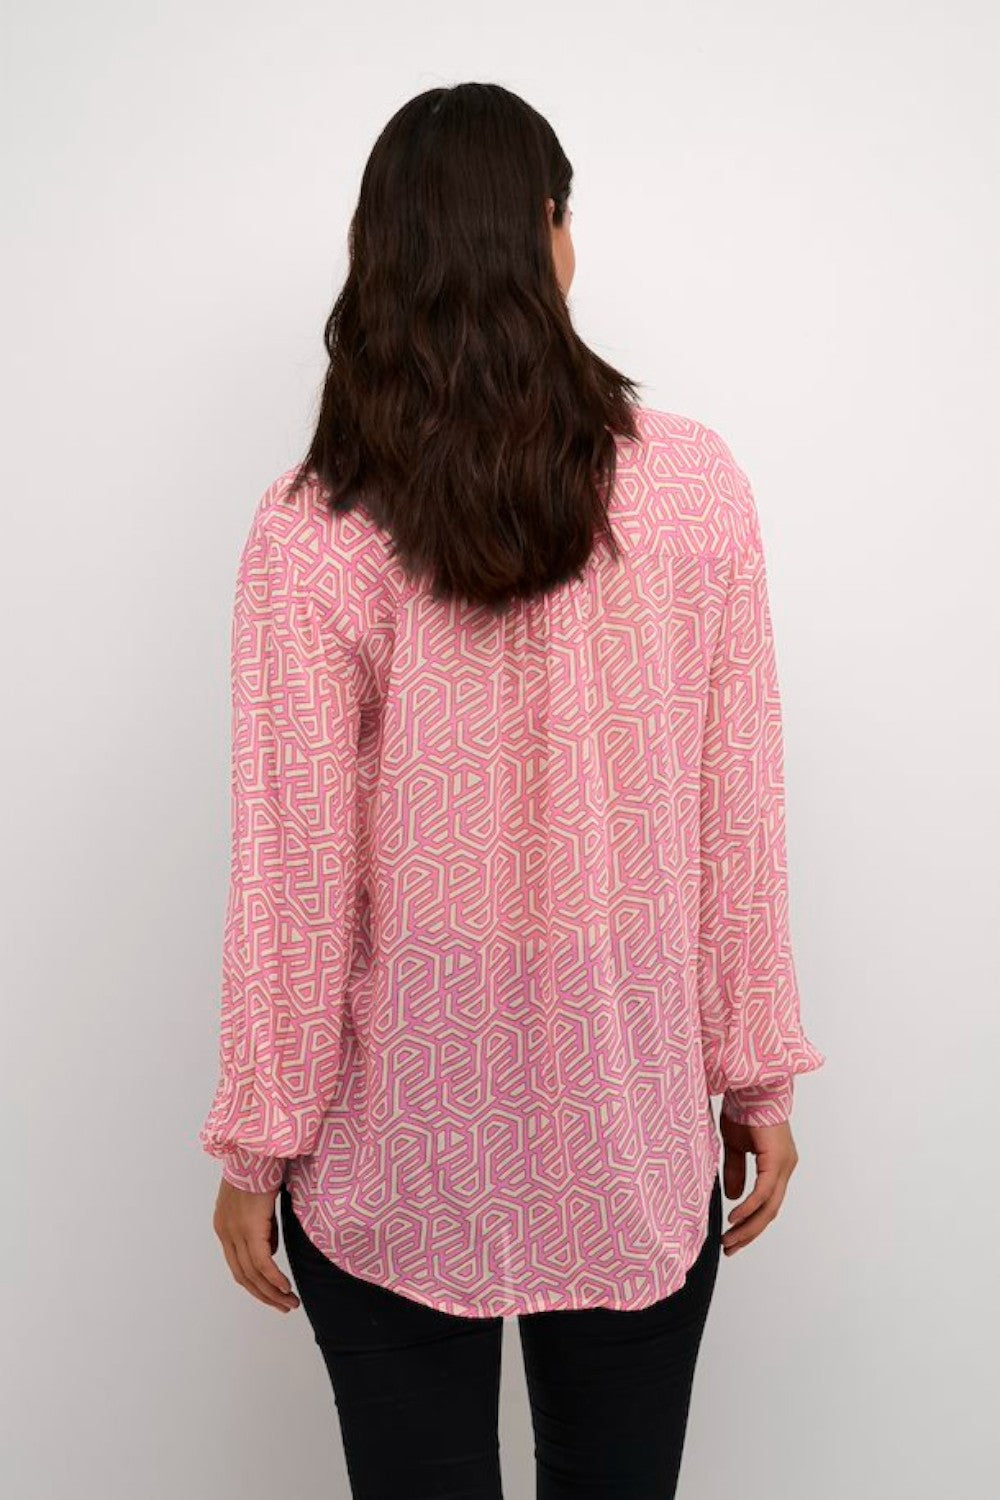 This long-sleeved shirt features a relaxed fit and mid-thigh length, lending a stylish yet comfortable vibe. Crafted in high-quality woven fabric, its geometric print is perfect for versatile wear, complementing both jeans and skirts for a trendy look.